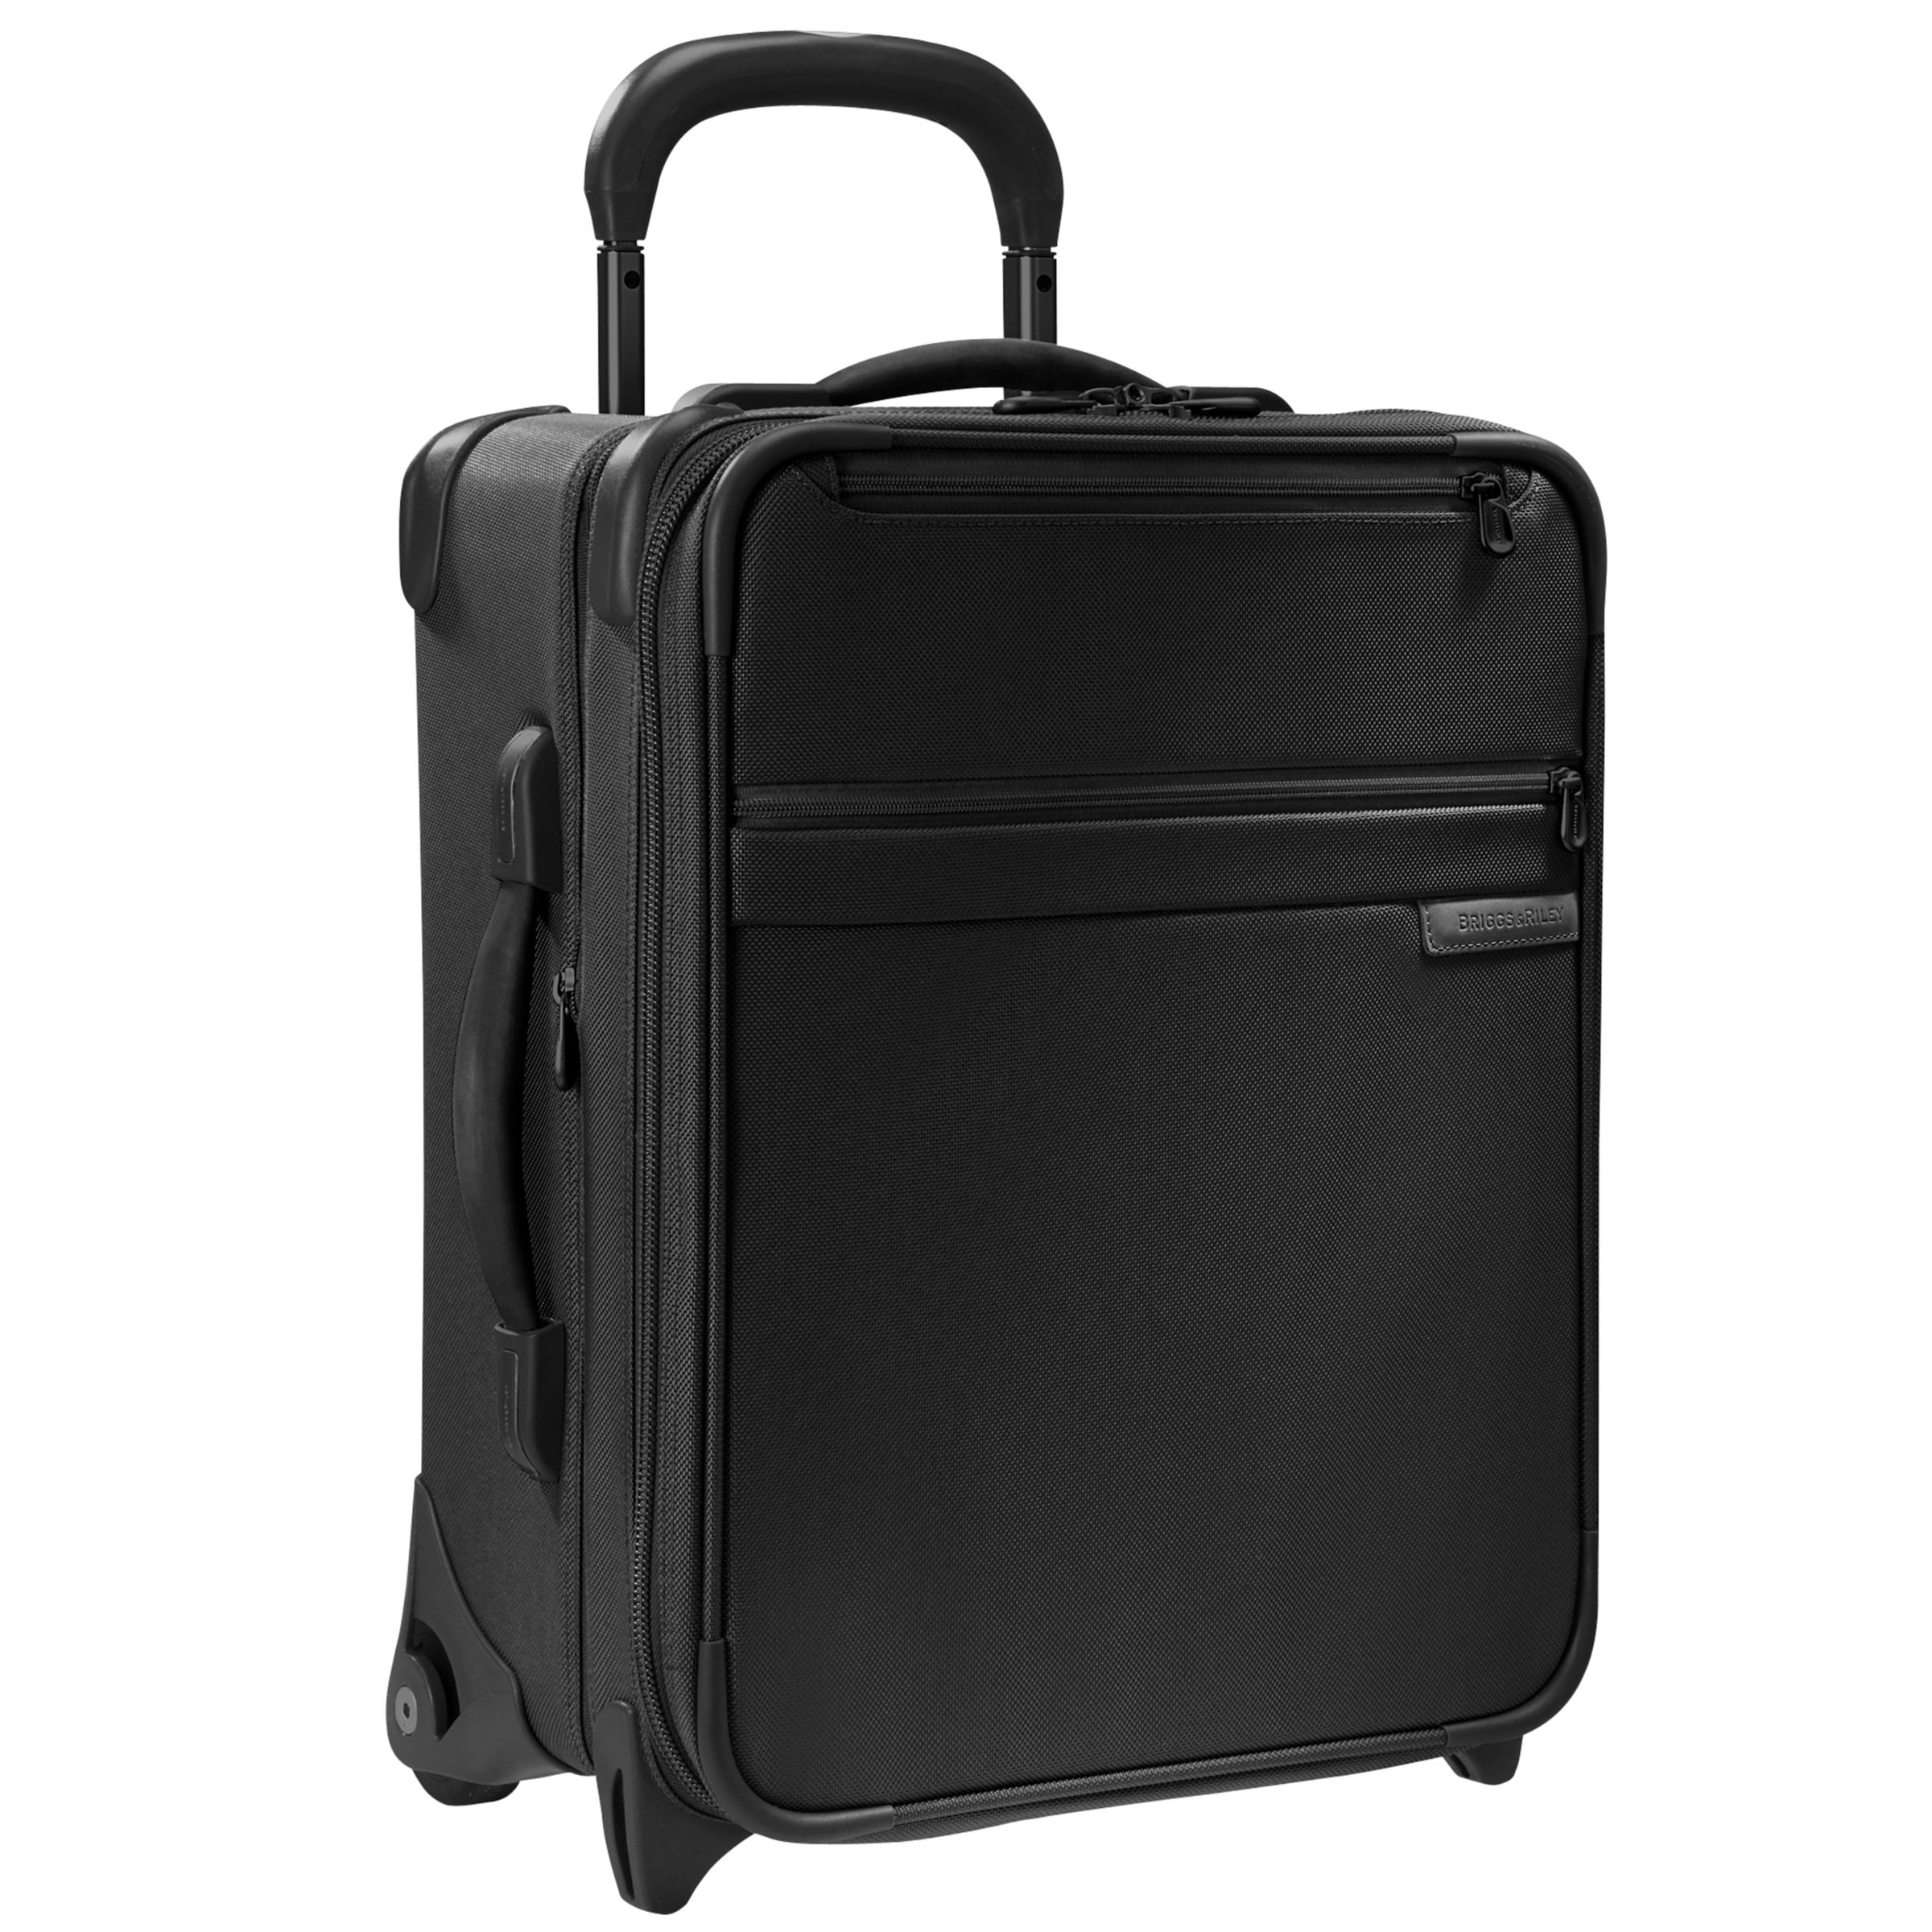 Briggs & Riley 18" Expandable Cabin Trolley Case, Black at John Lewis